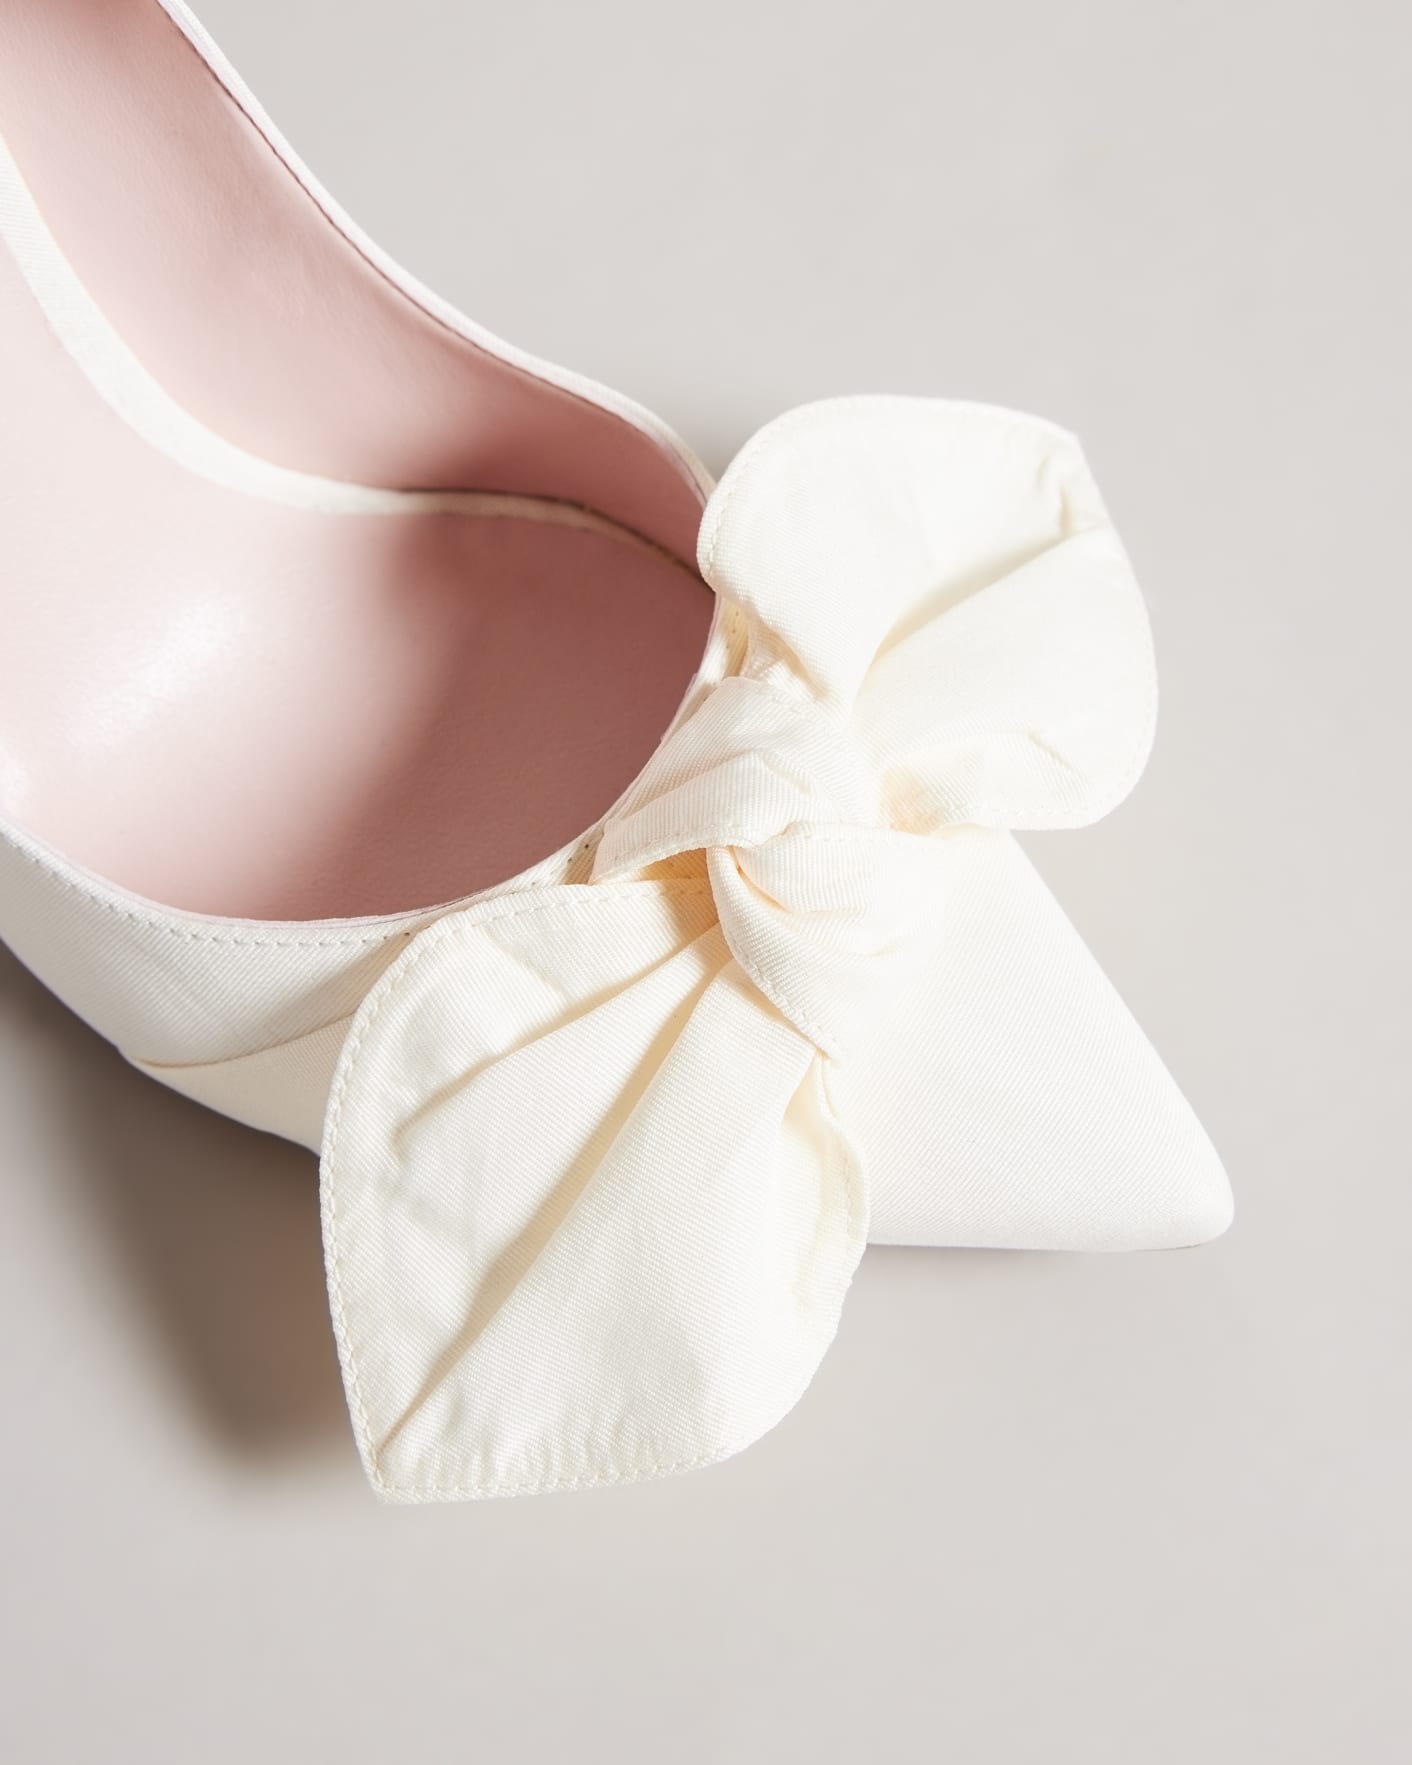 Ivory Moire Satin Bow Court Shoes Ted Baker